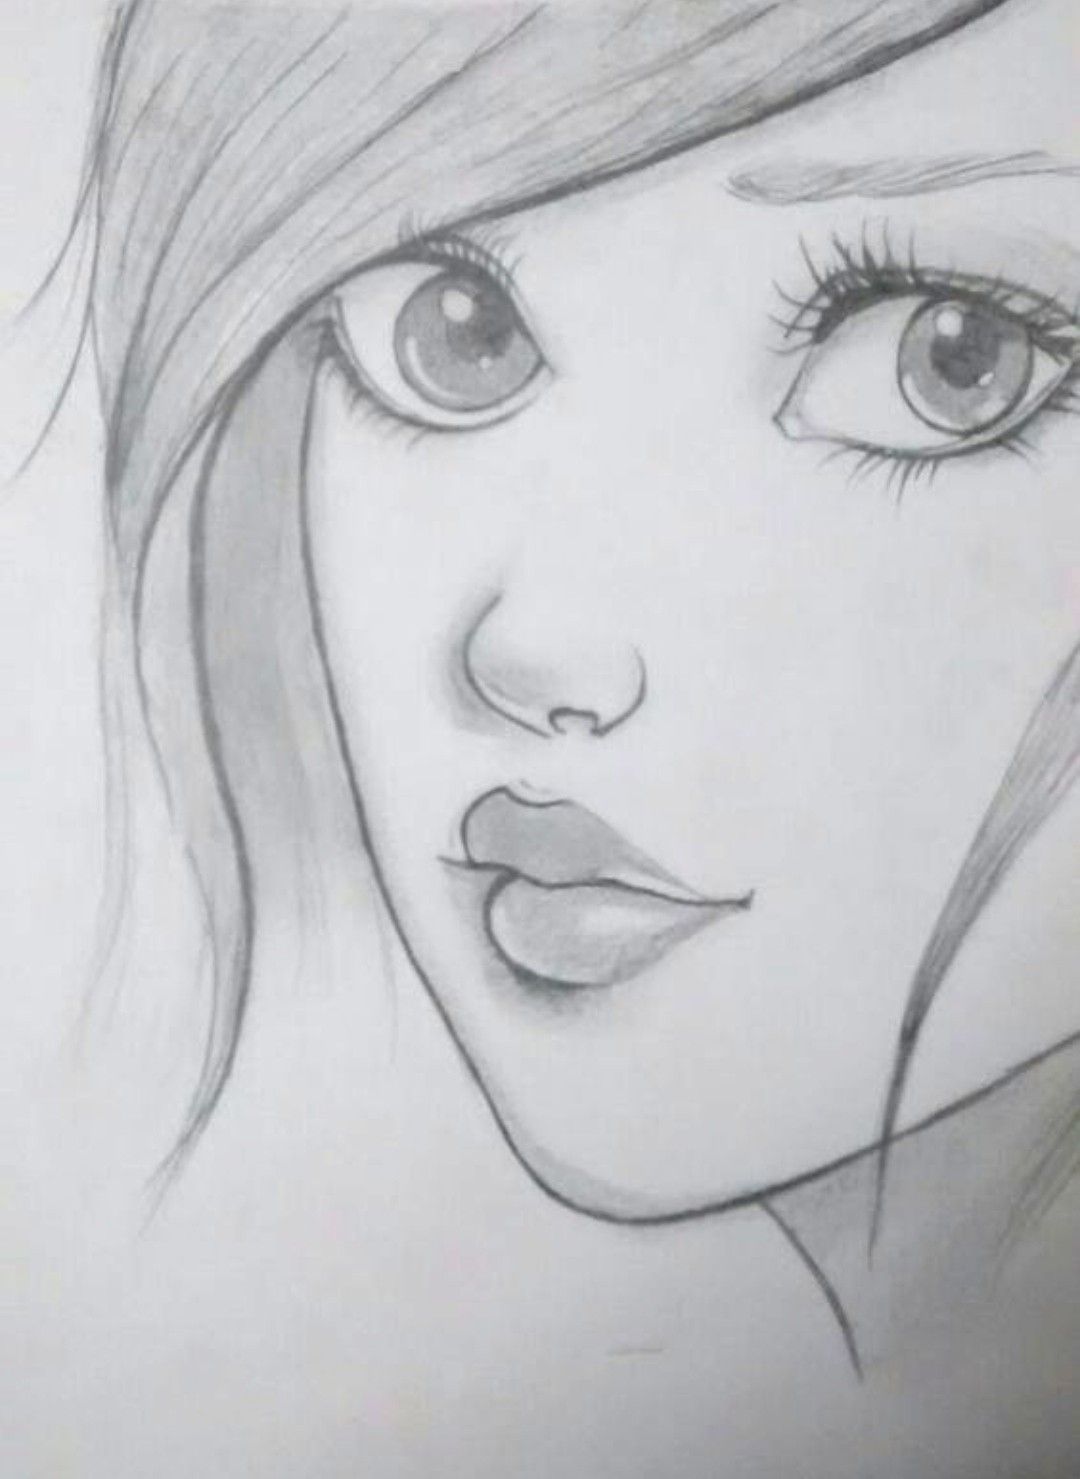 Drawing Pencil Realistic Girl | See Fullimage: Drawing penci… | Flickr-saigonsouth.com.vn